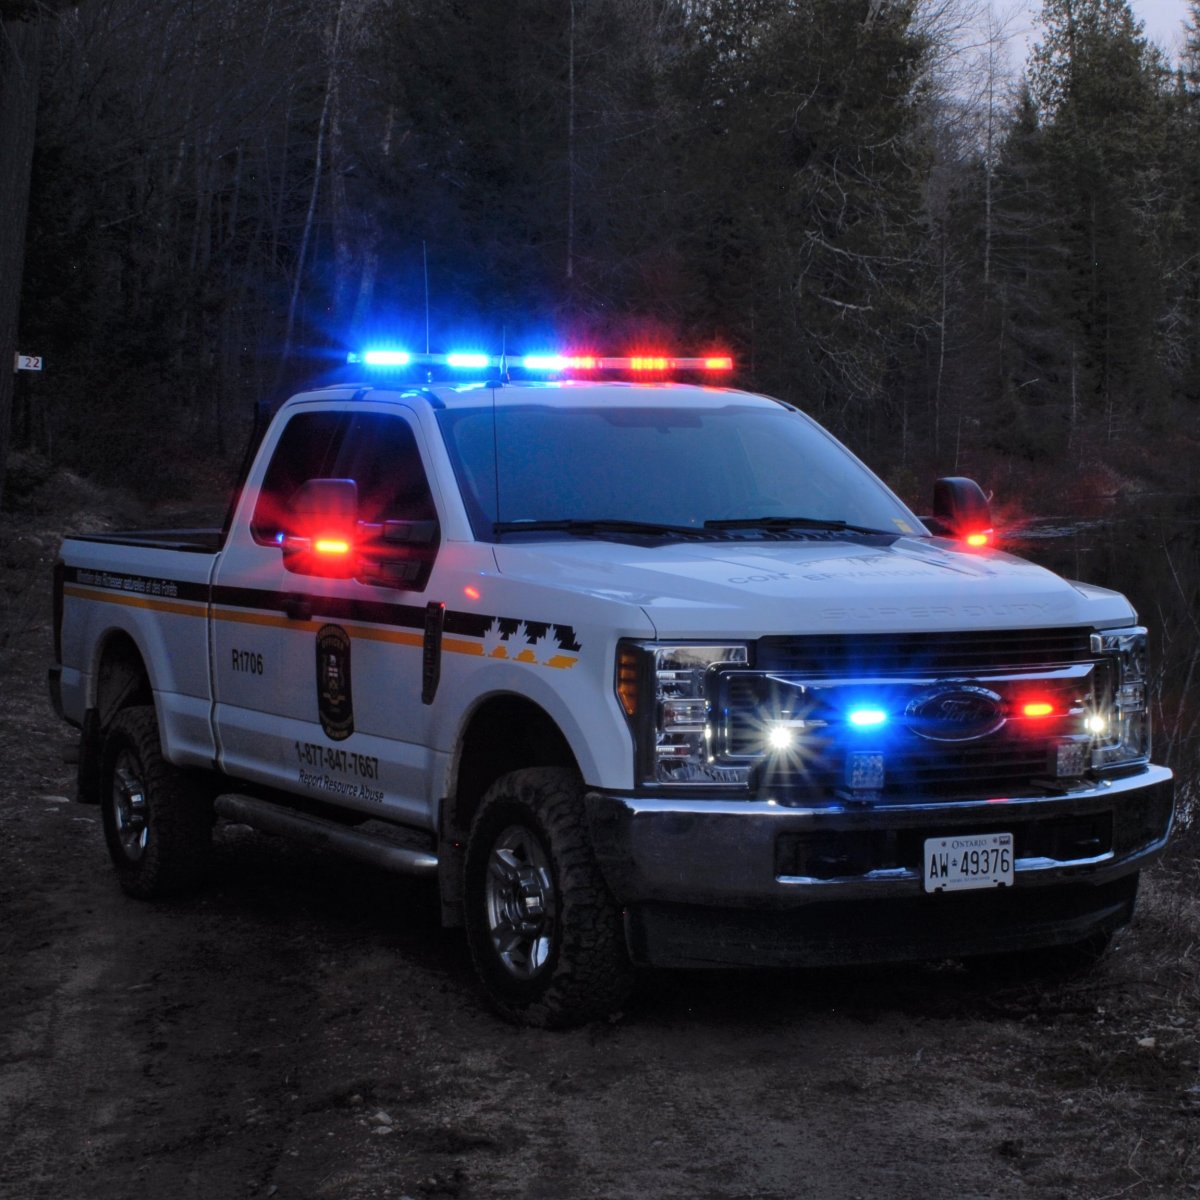 A Kingston man was charged with careless use of a fire arm after an incident in Oct. 2018.